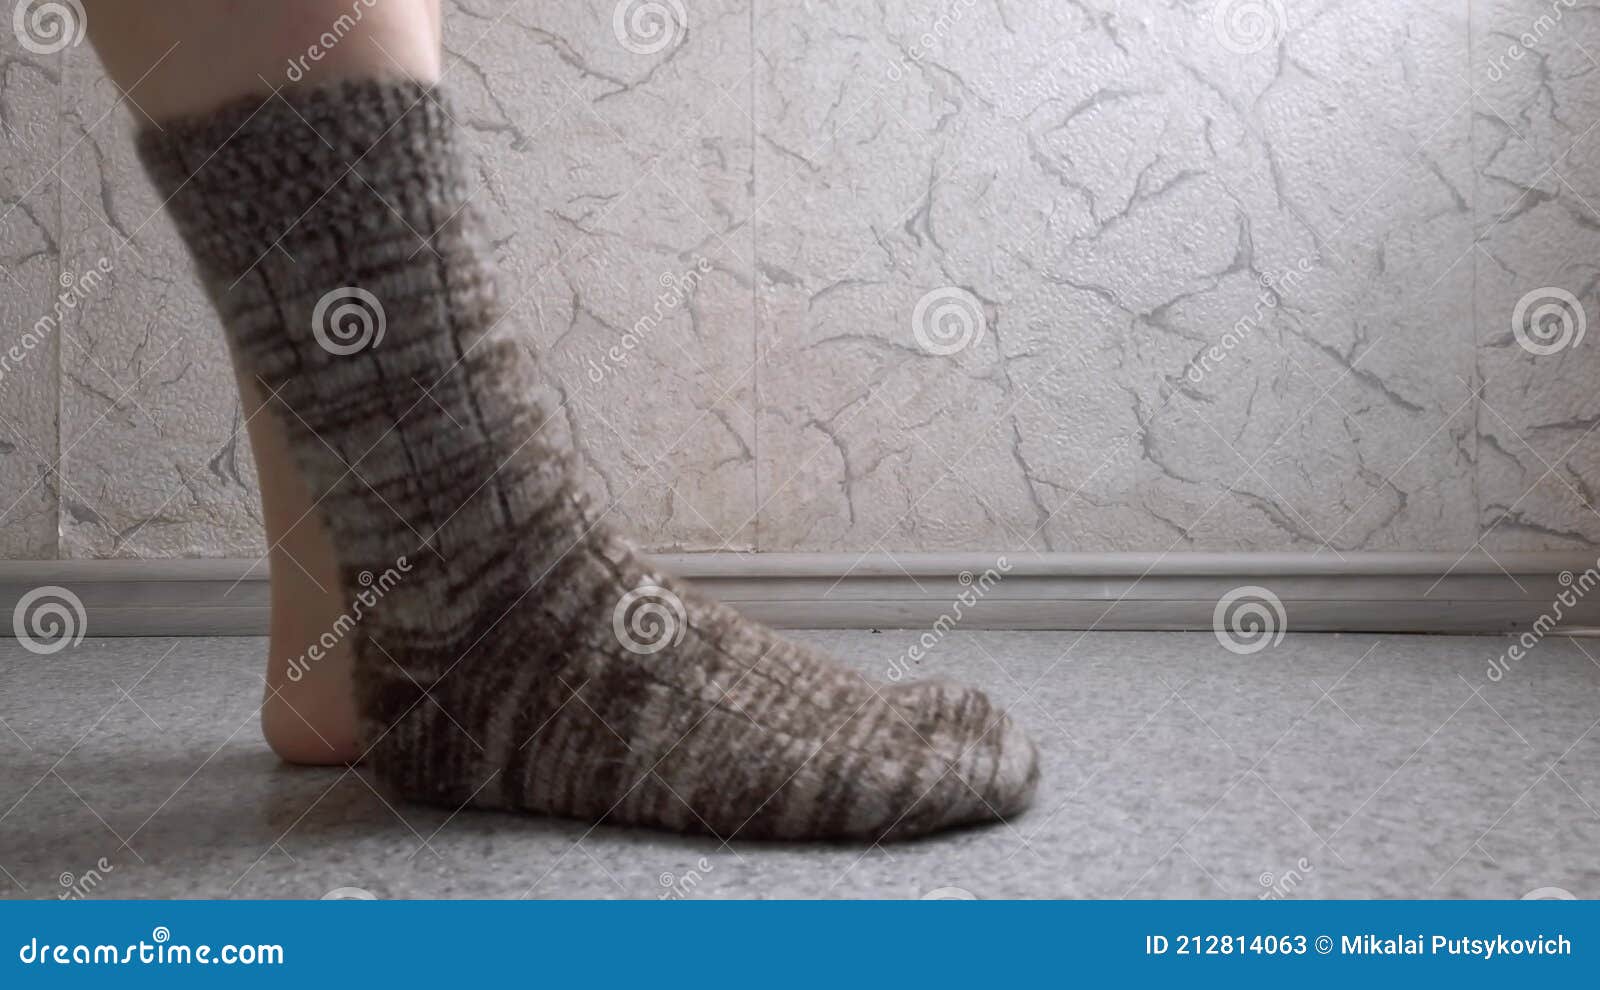 Closeup of female feet with a brown woolen sock on the left foot on the bed  Stock Photo by wirestock